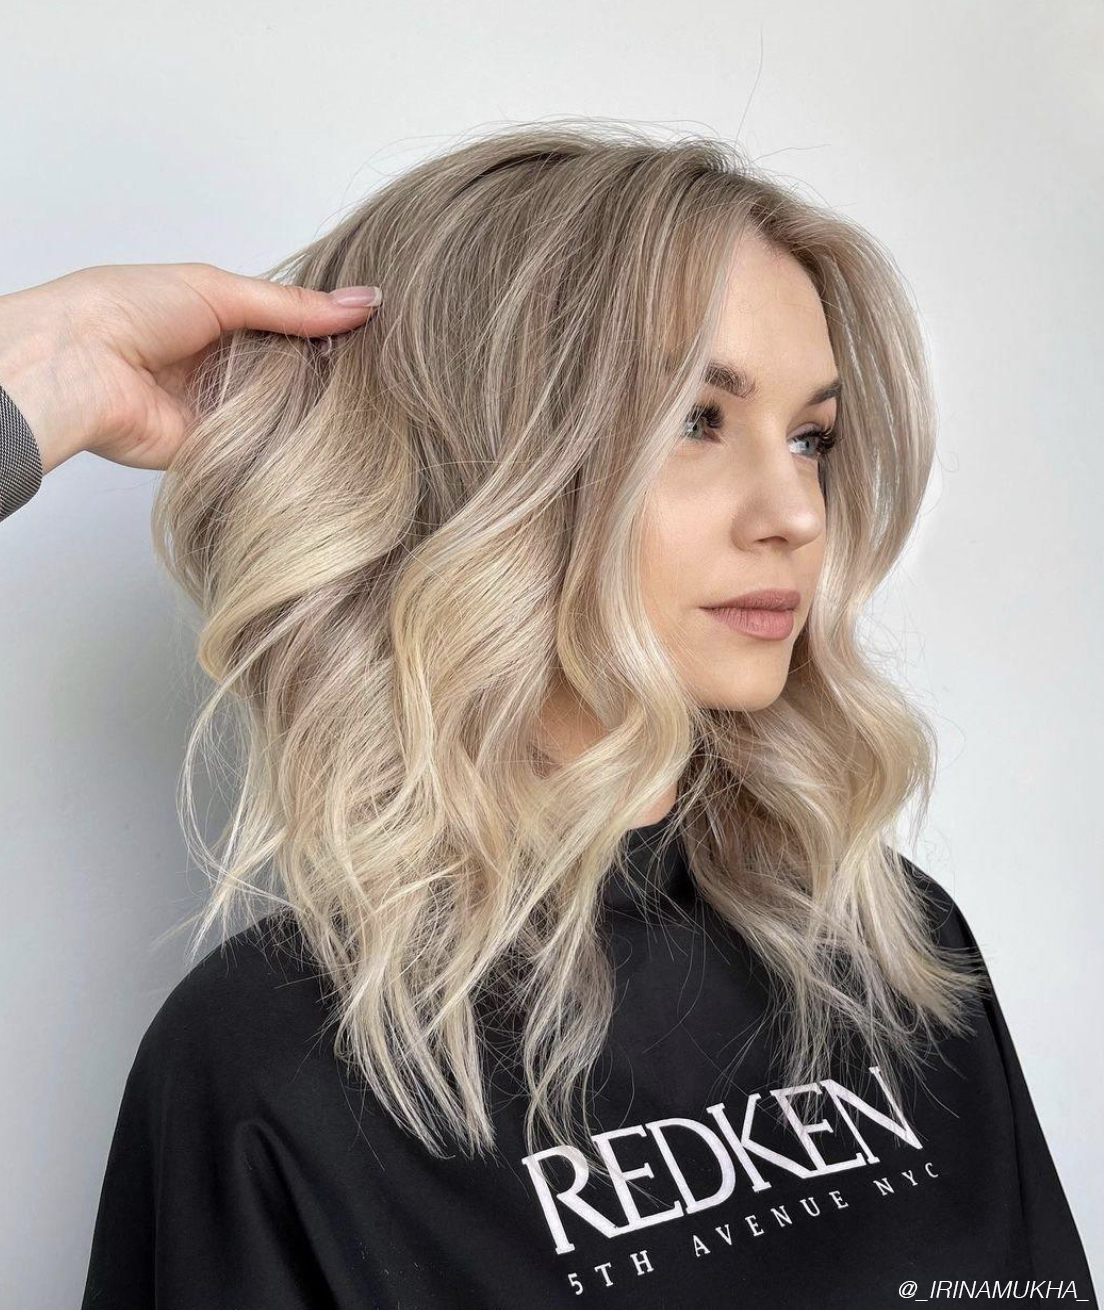 The Top 2022 Hair Trends - Bangstyle - House of Hair Inspiration